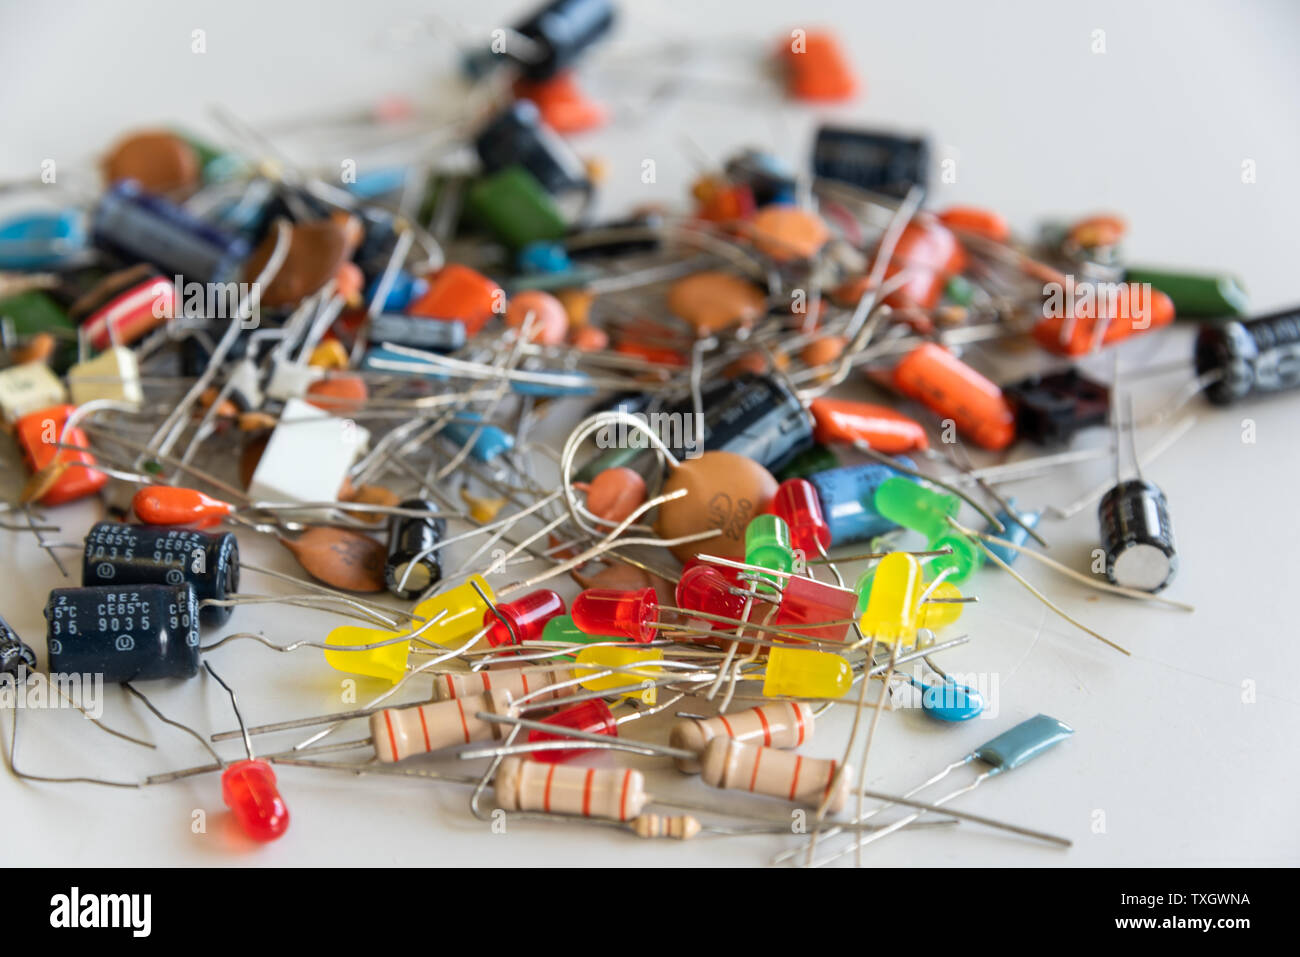 Mix of electronic components with LEDs Stock Photo